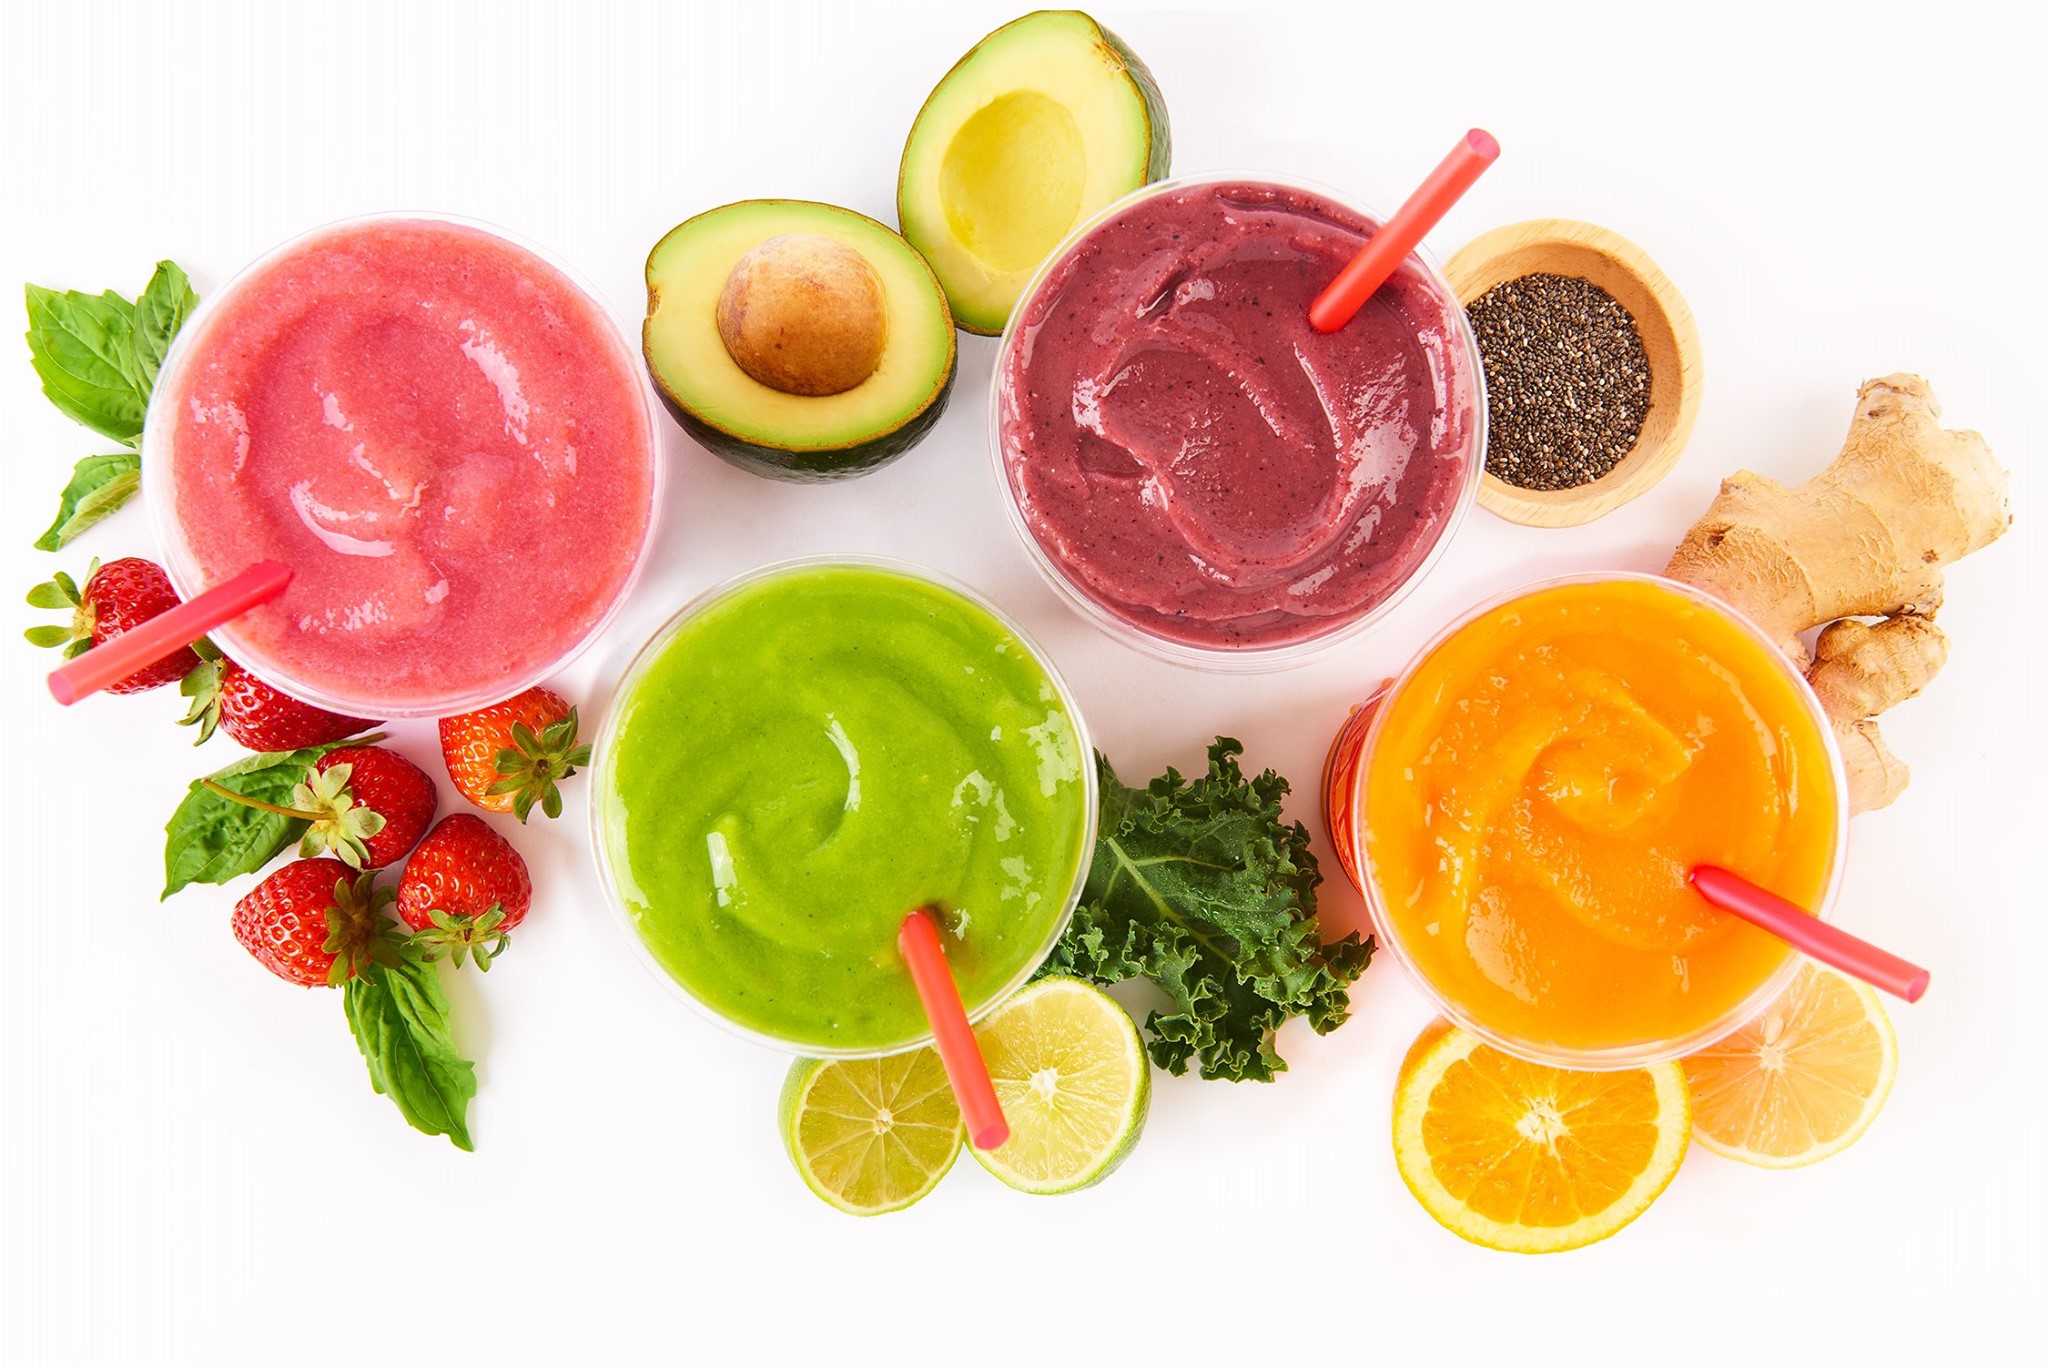 Pulp Juice and Smoothie Bar